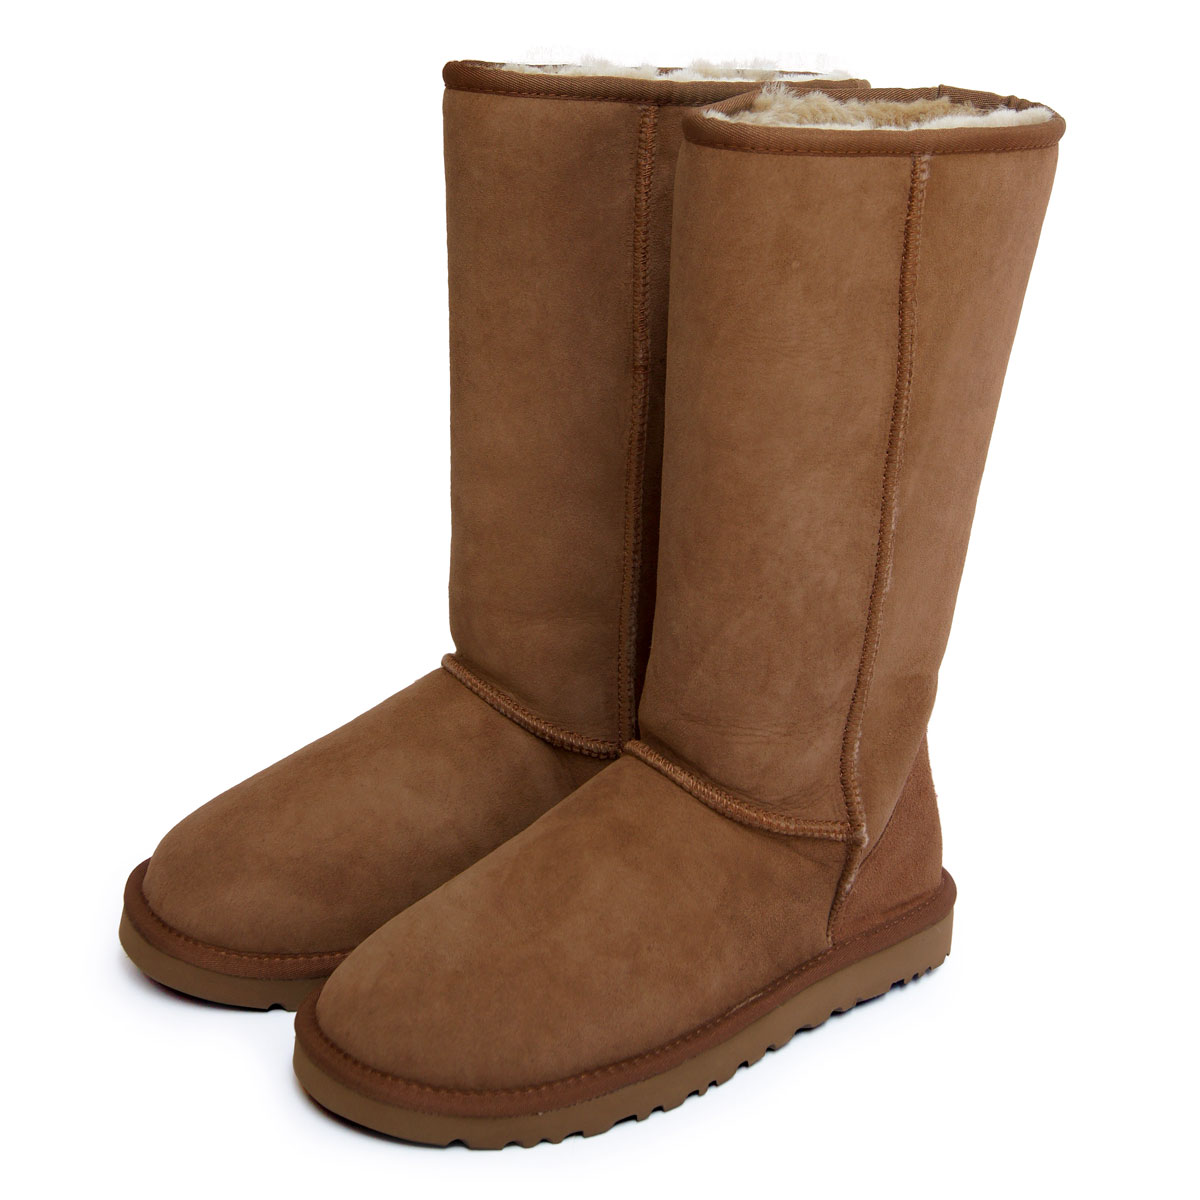 Classical Ugg Boots | Ugg Boots on sale|Cheap Uggs outlet store